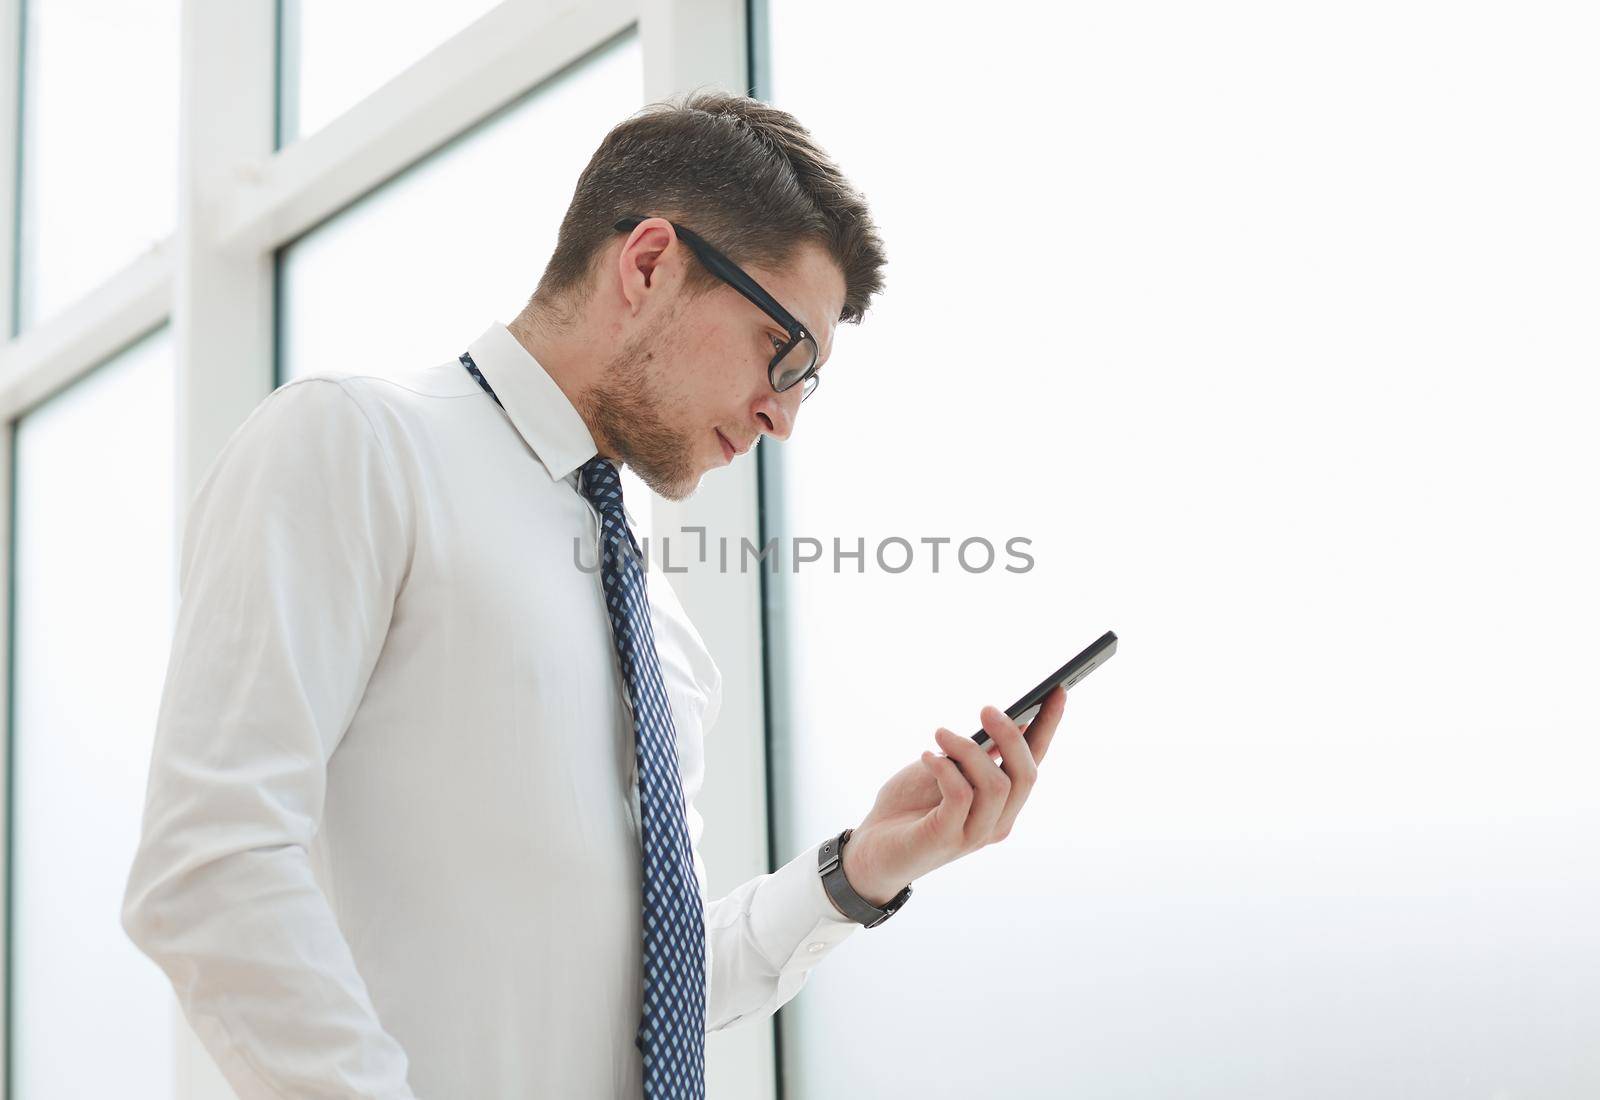 Businessman using smart phone in blurred office space background and copy space